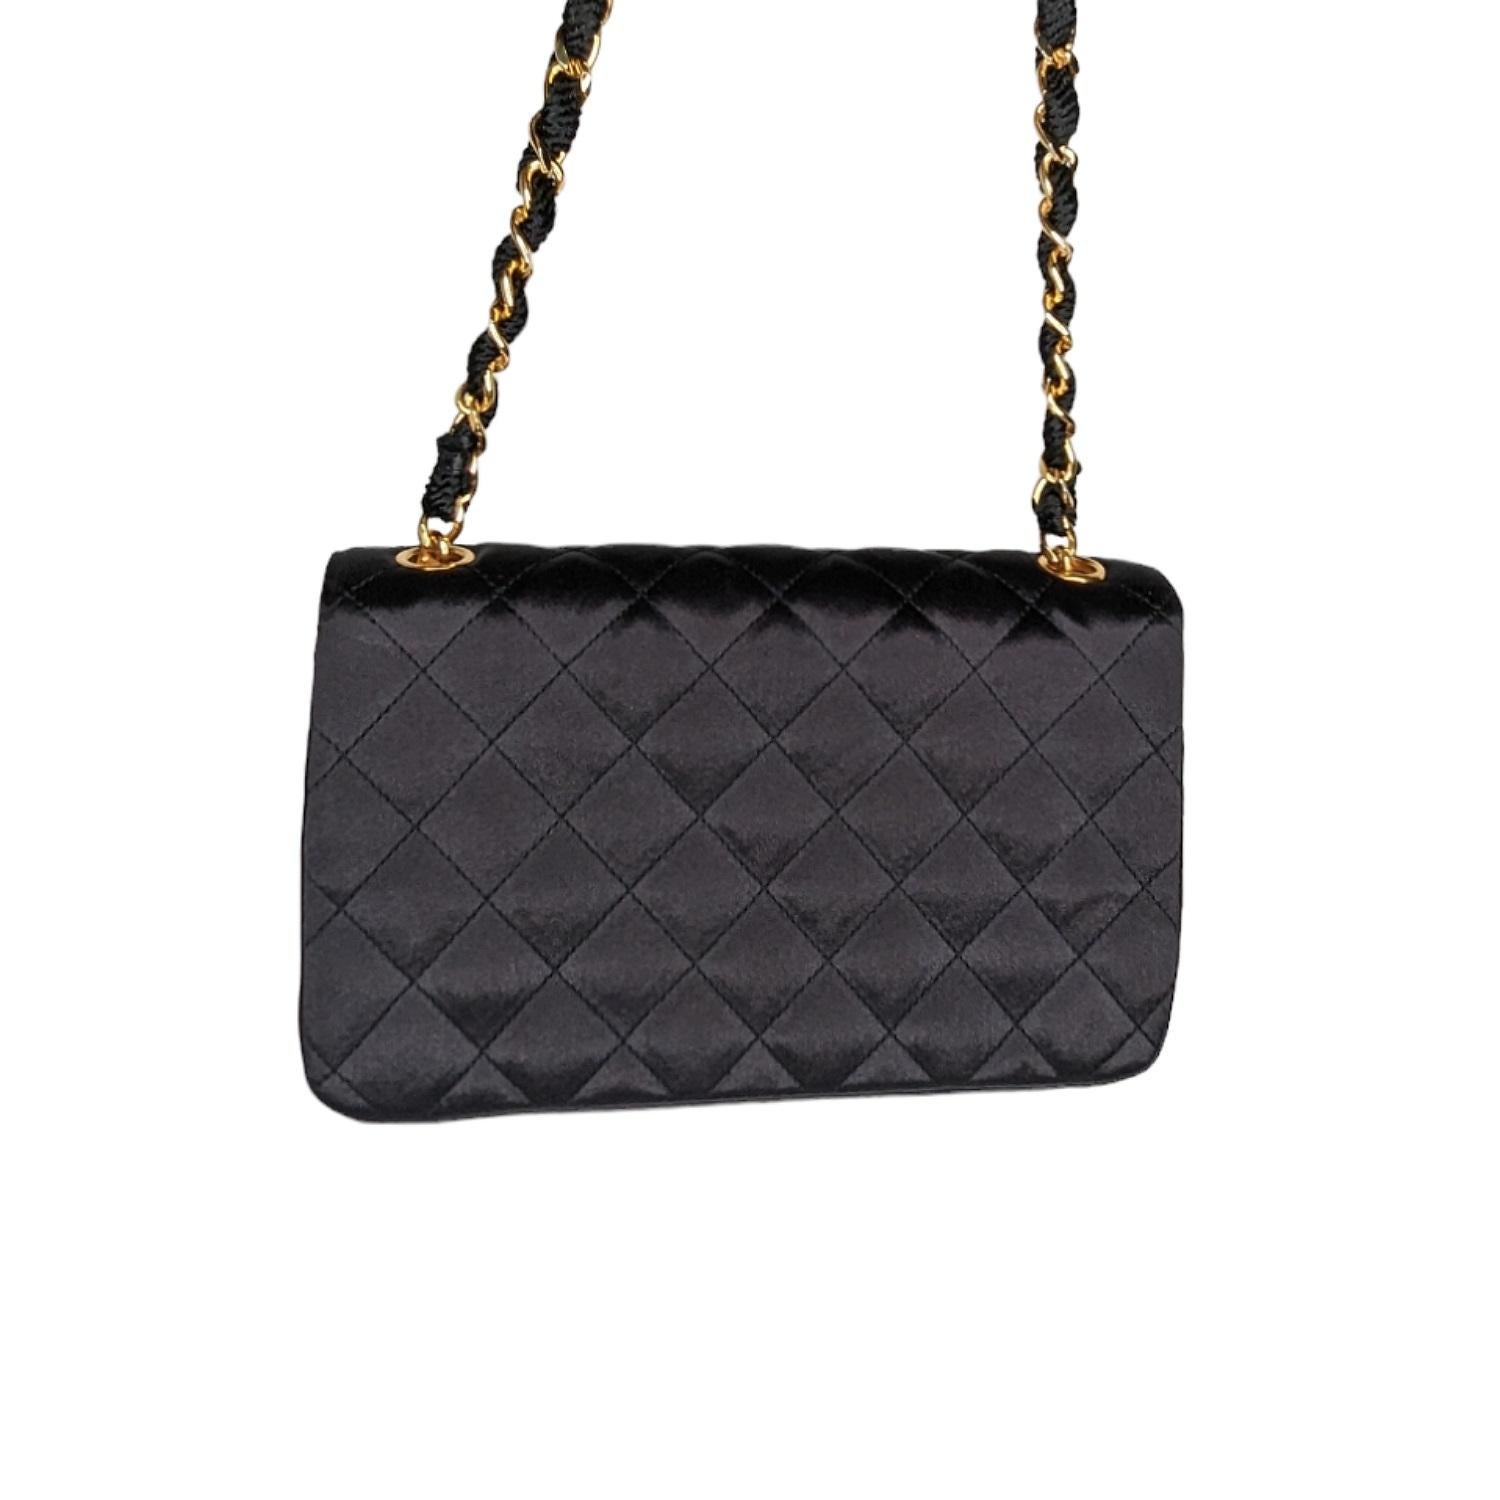 This is a chic mini shoulder bag that is finely crafted of black diamond quilted satin fabric. The bag features a gold chain link and fabric shoulder strap and a CC turn-lock opens to a tonal satin interior with a slip pocket. This is an excellent